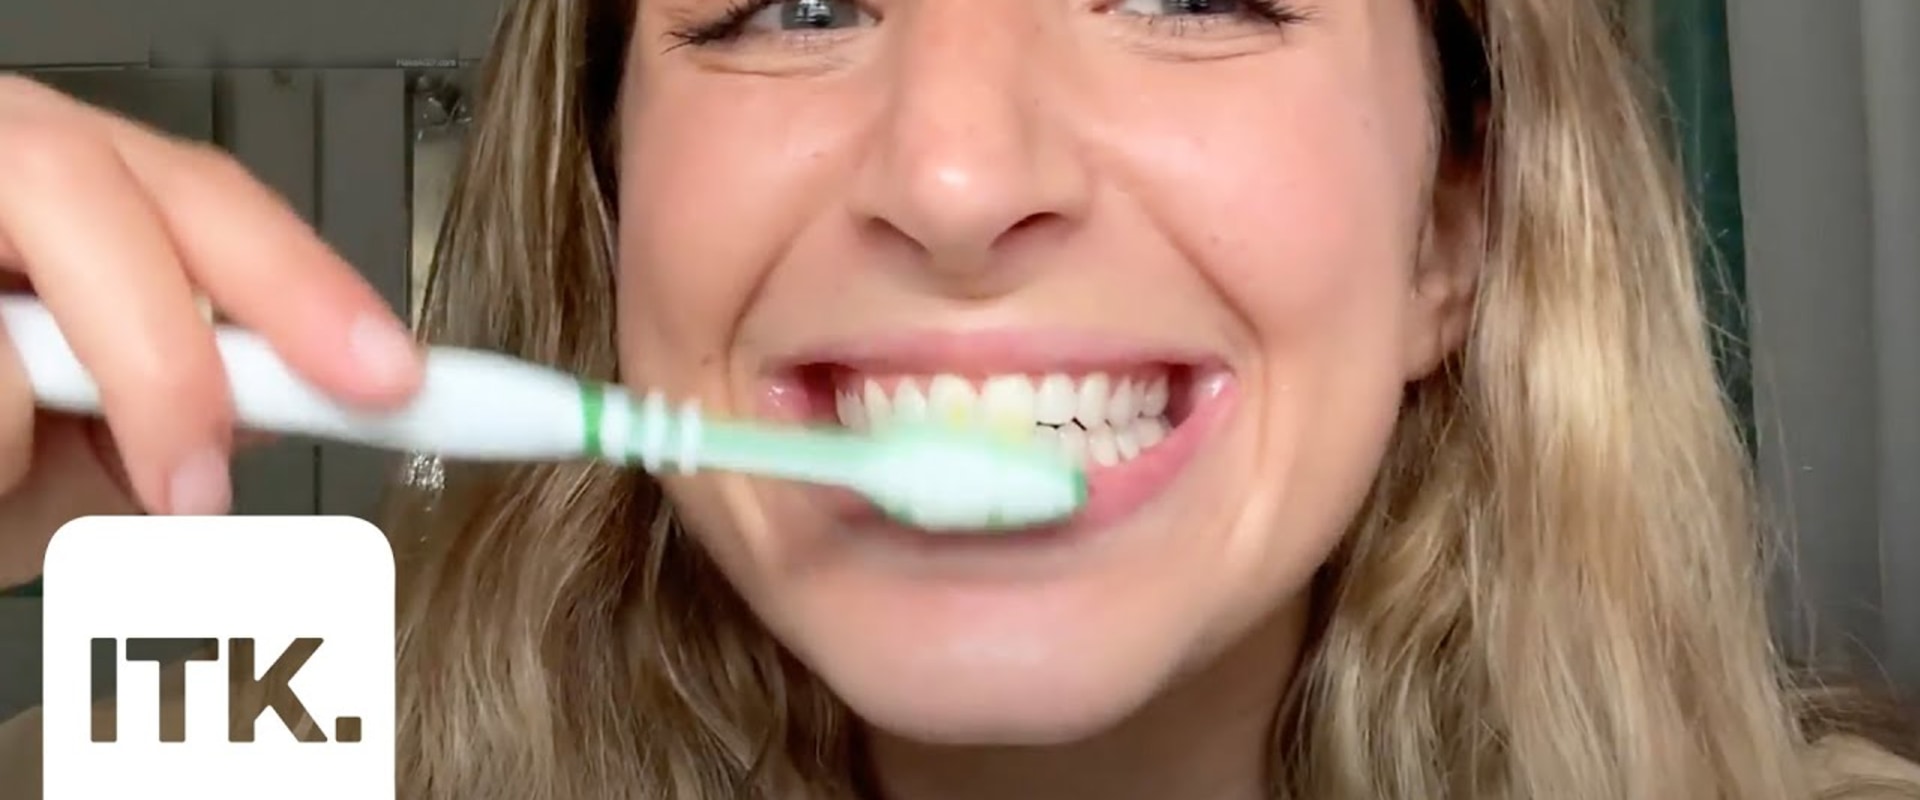 At-Home Treatments for Teeth Whitening Using Homemade Baking Soda Toothpaste